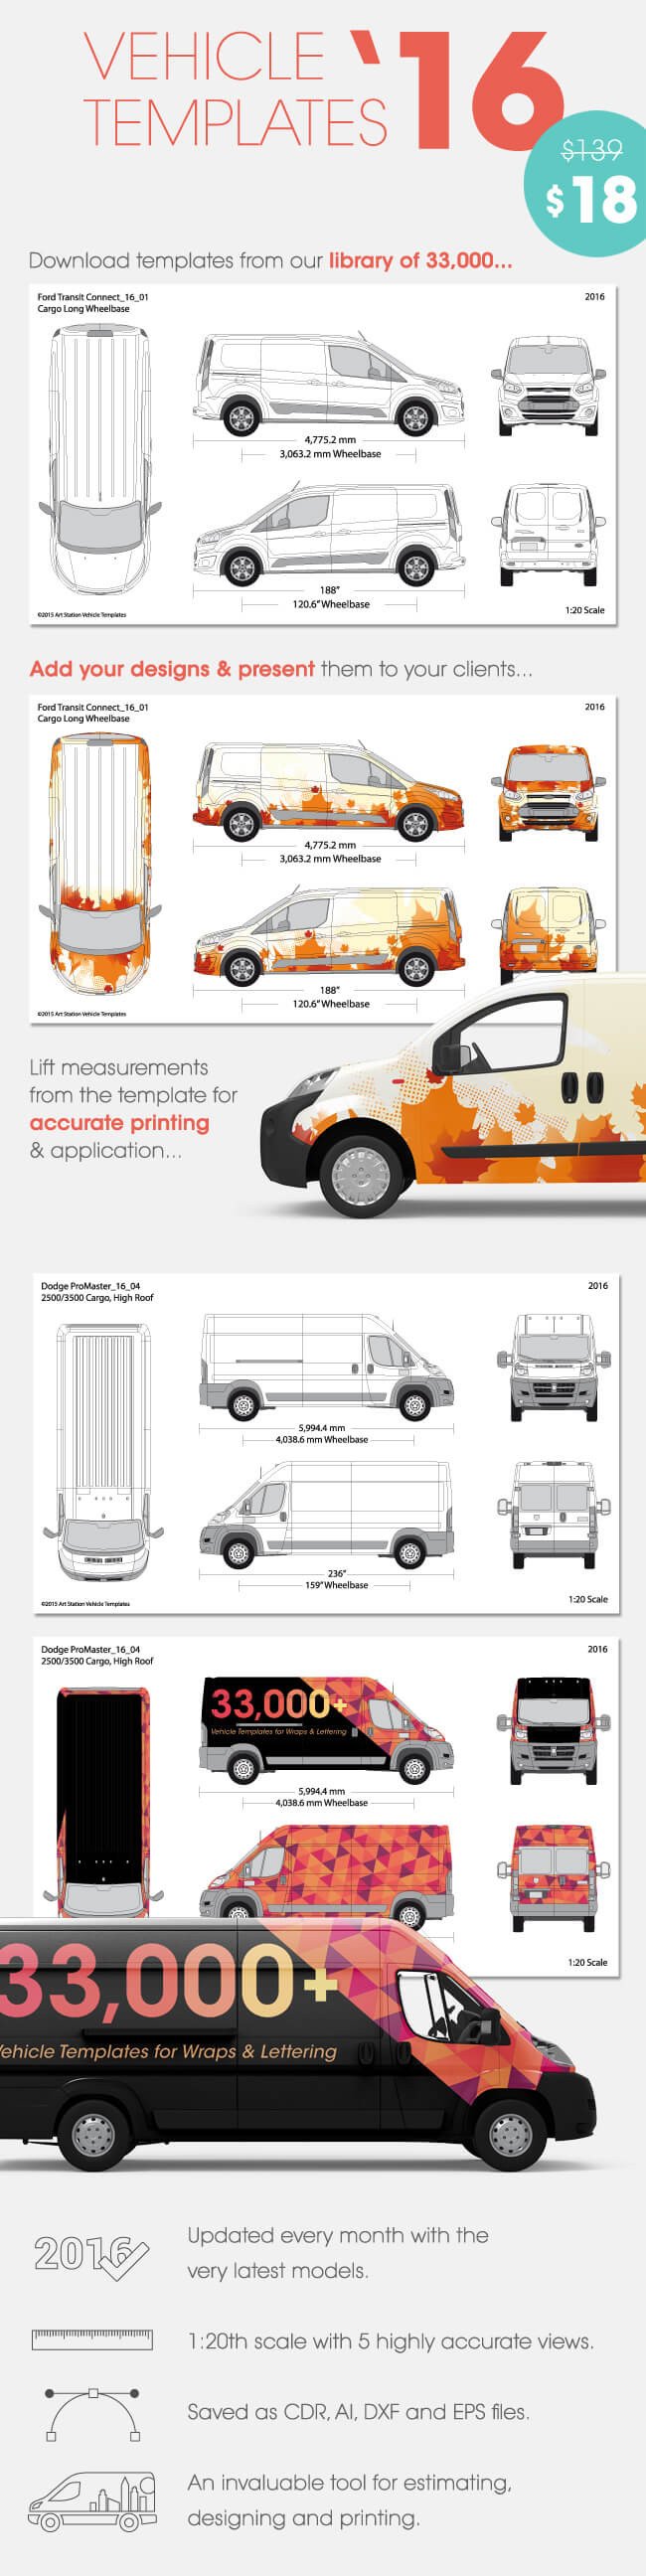 Download 50 Vehicle Templates for Wraps and Lettering from